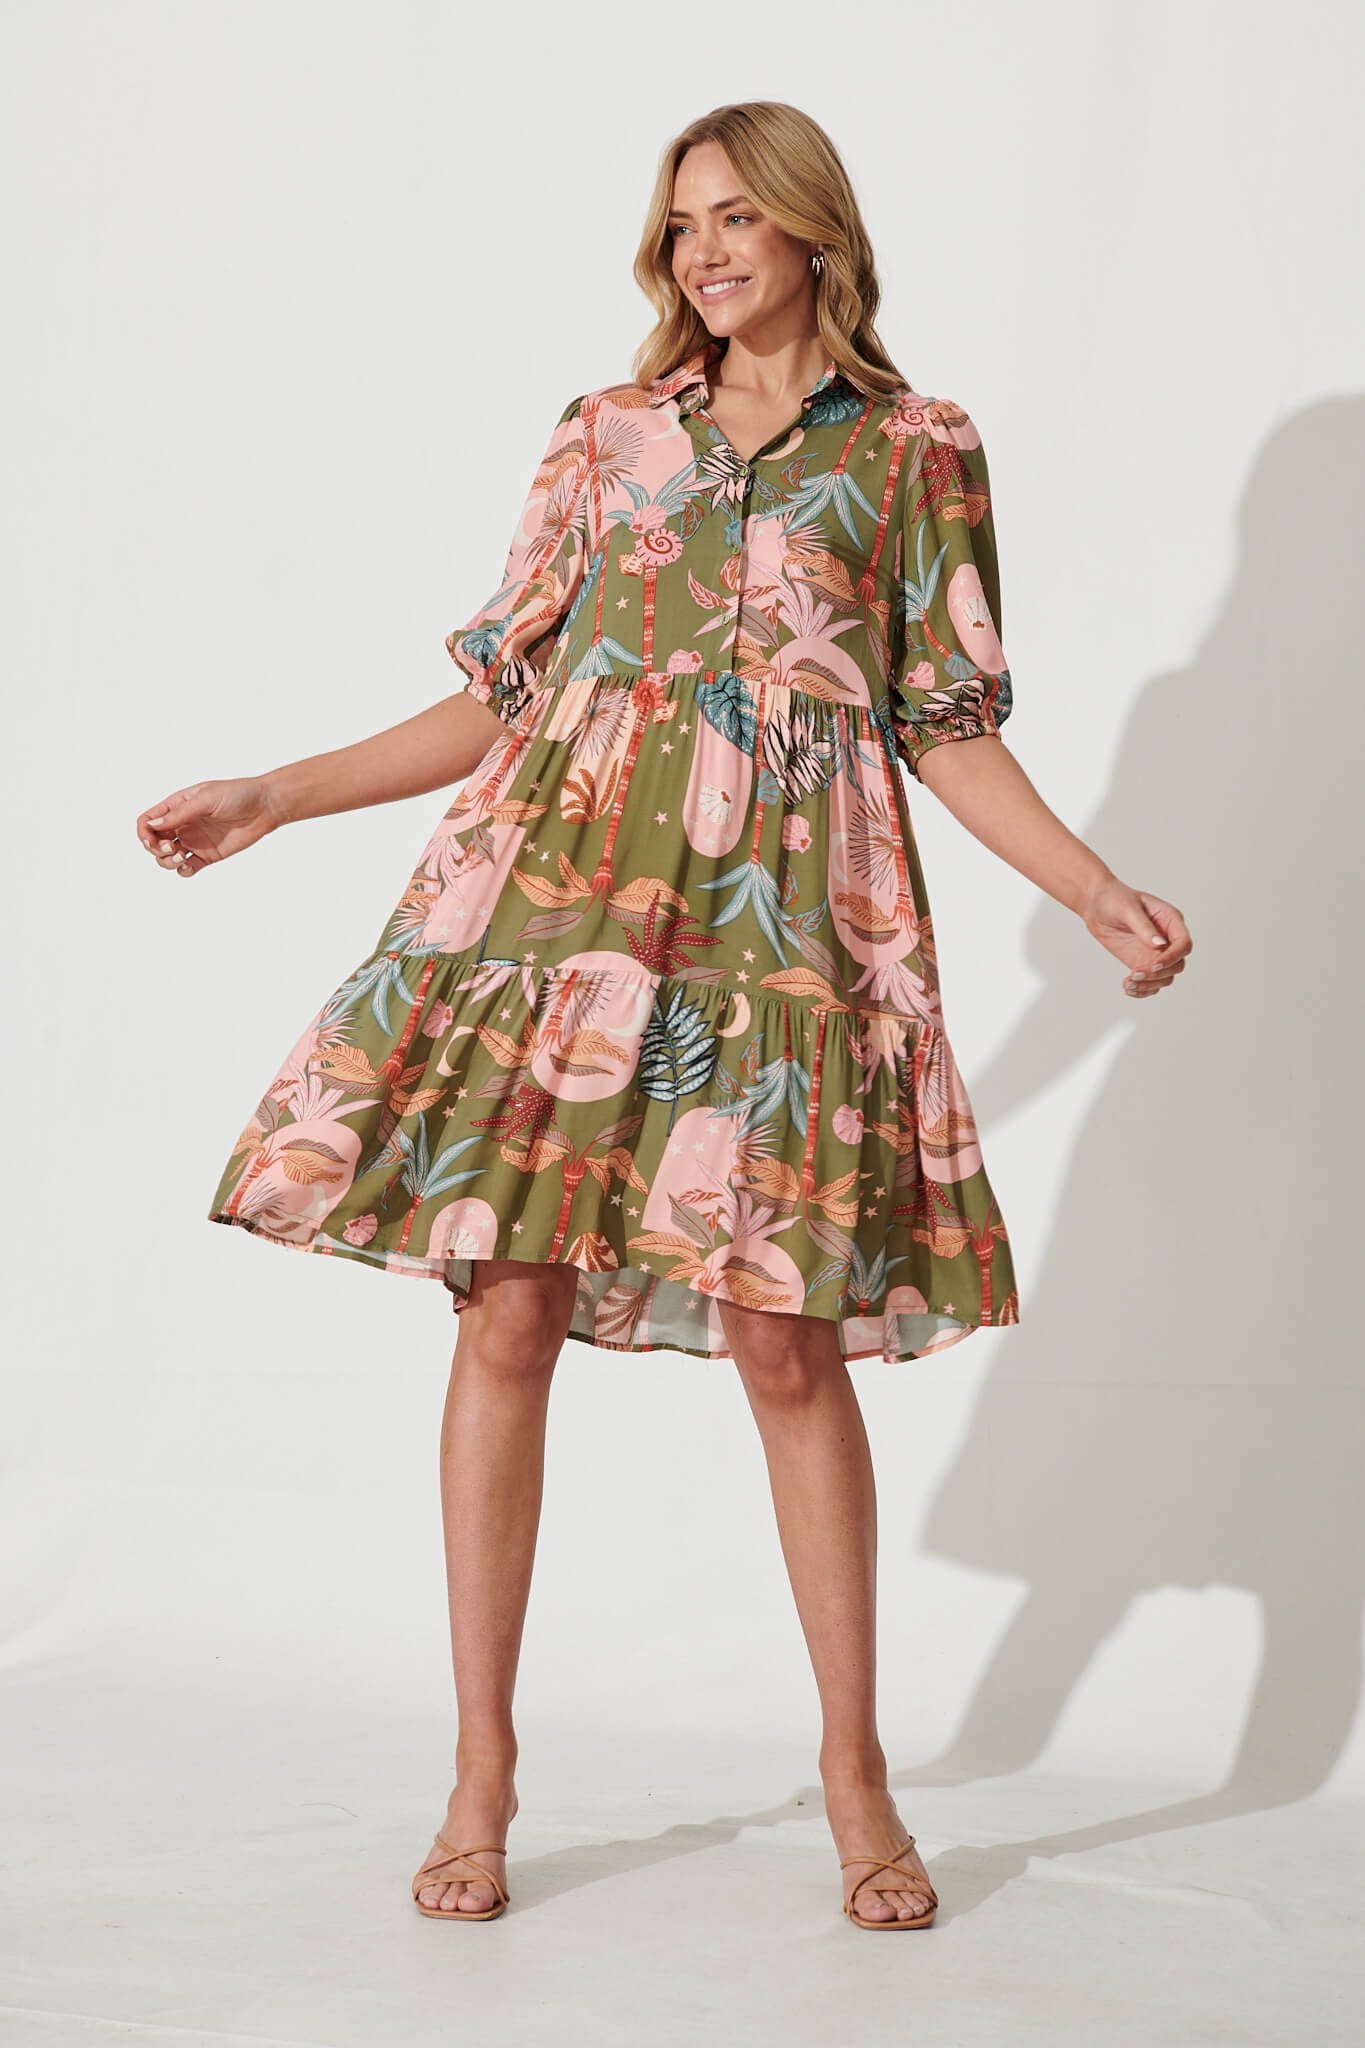 Cleveland Smock Dress In Khaki With Pink Print - full length